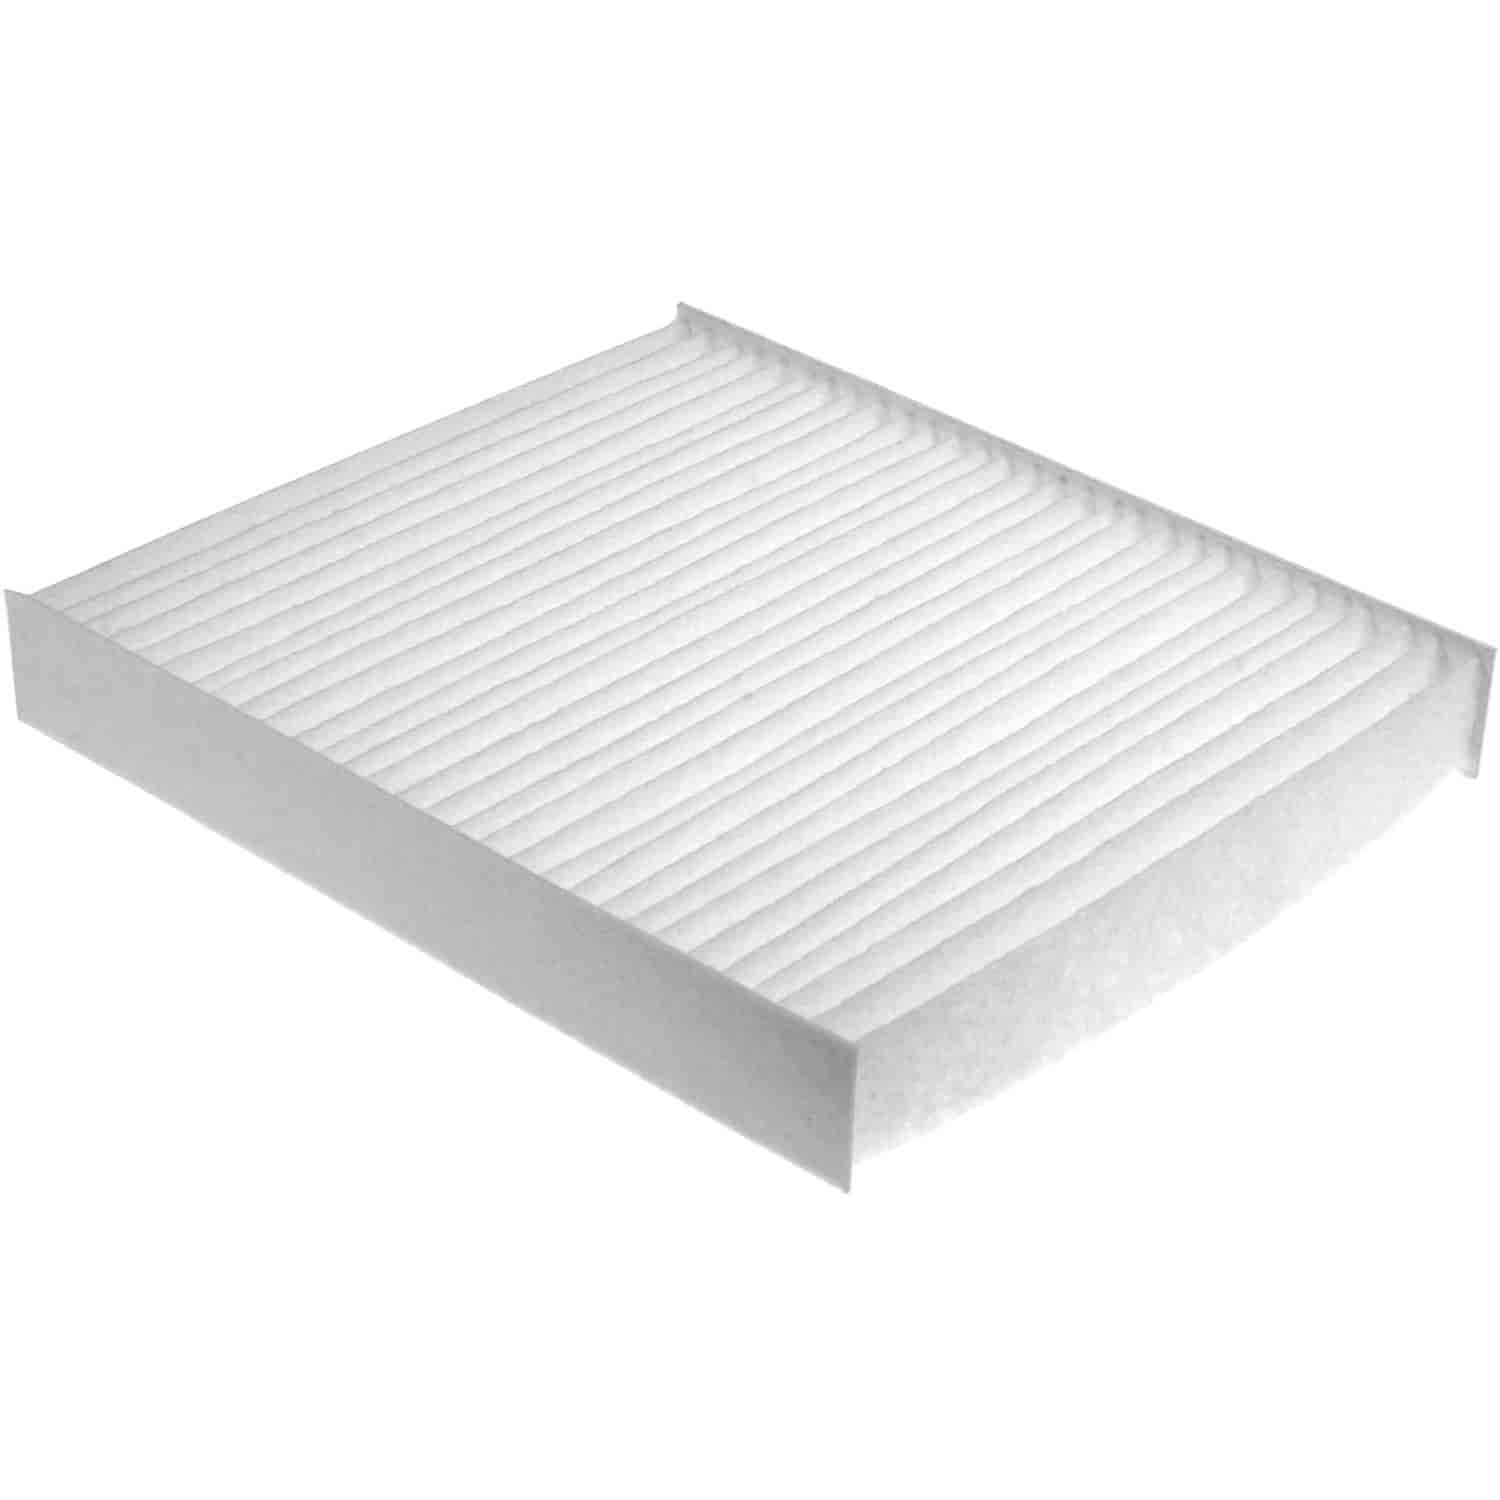 Mahle Cabin Air Filter for Kia Soul 1.6L and 2.0L 2010